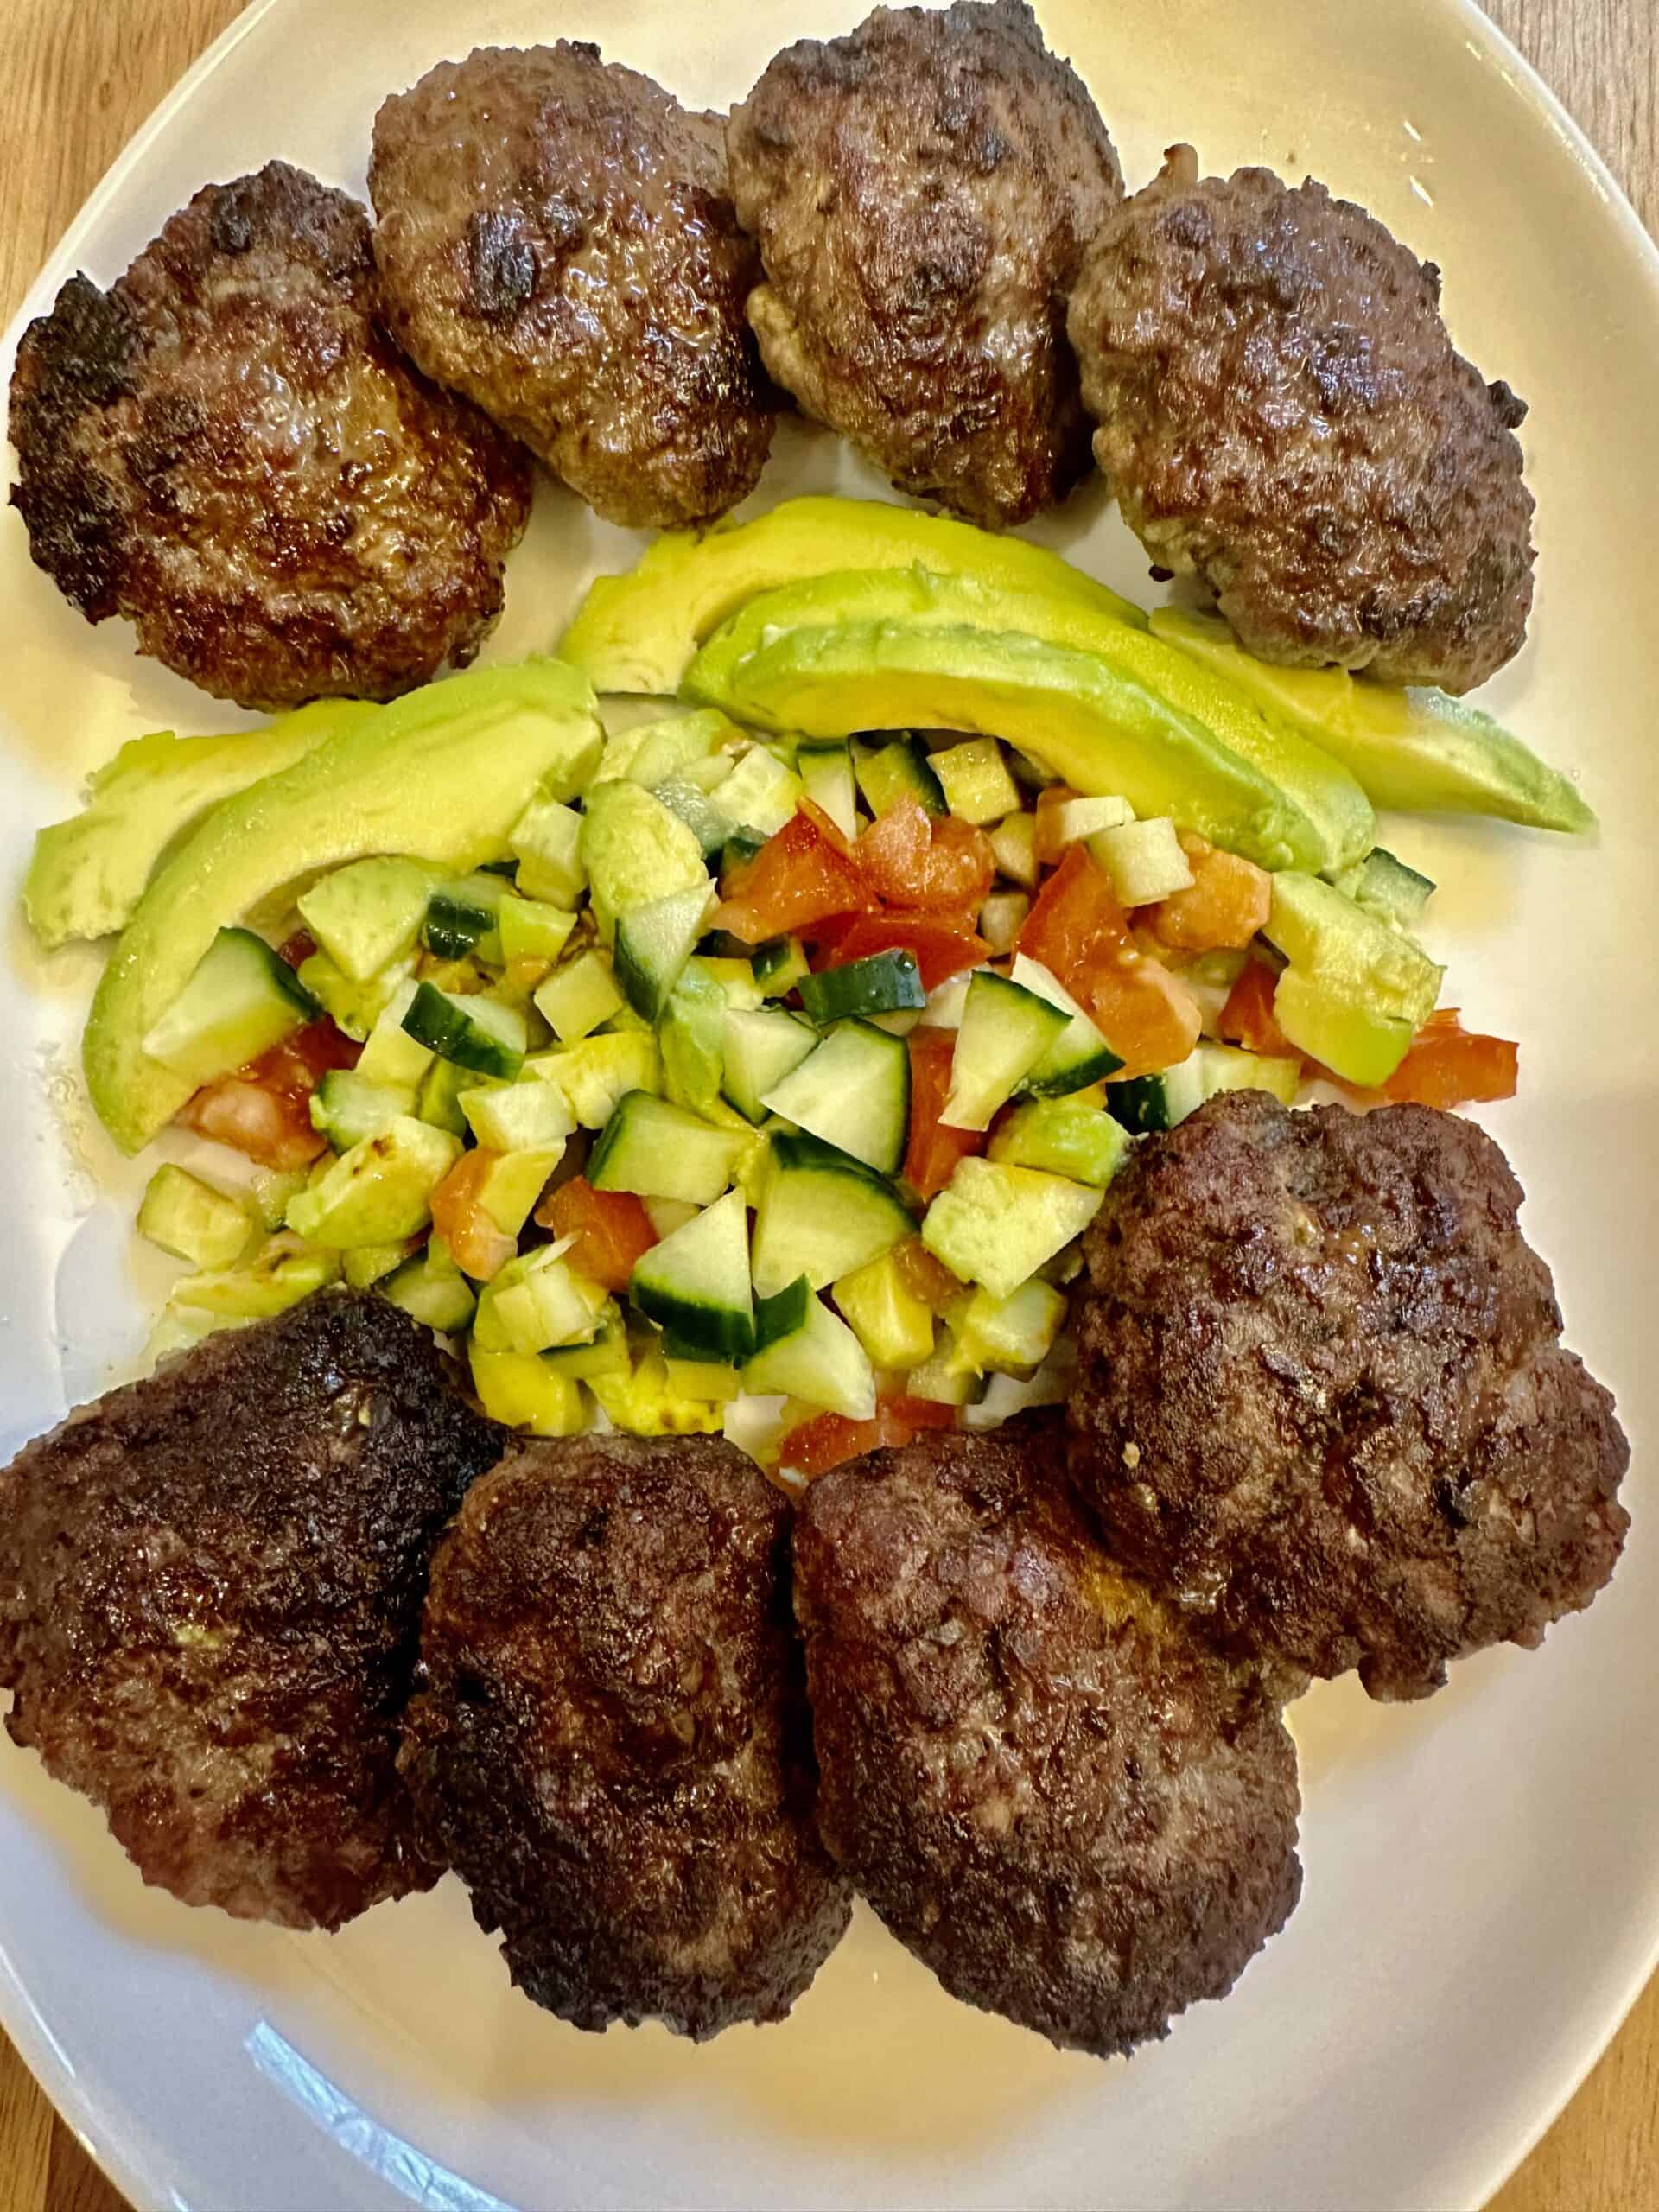 Eight burger patties with fresh avocado salad on a white platter.